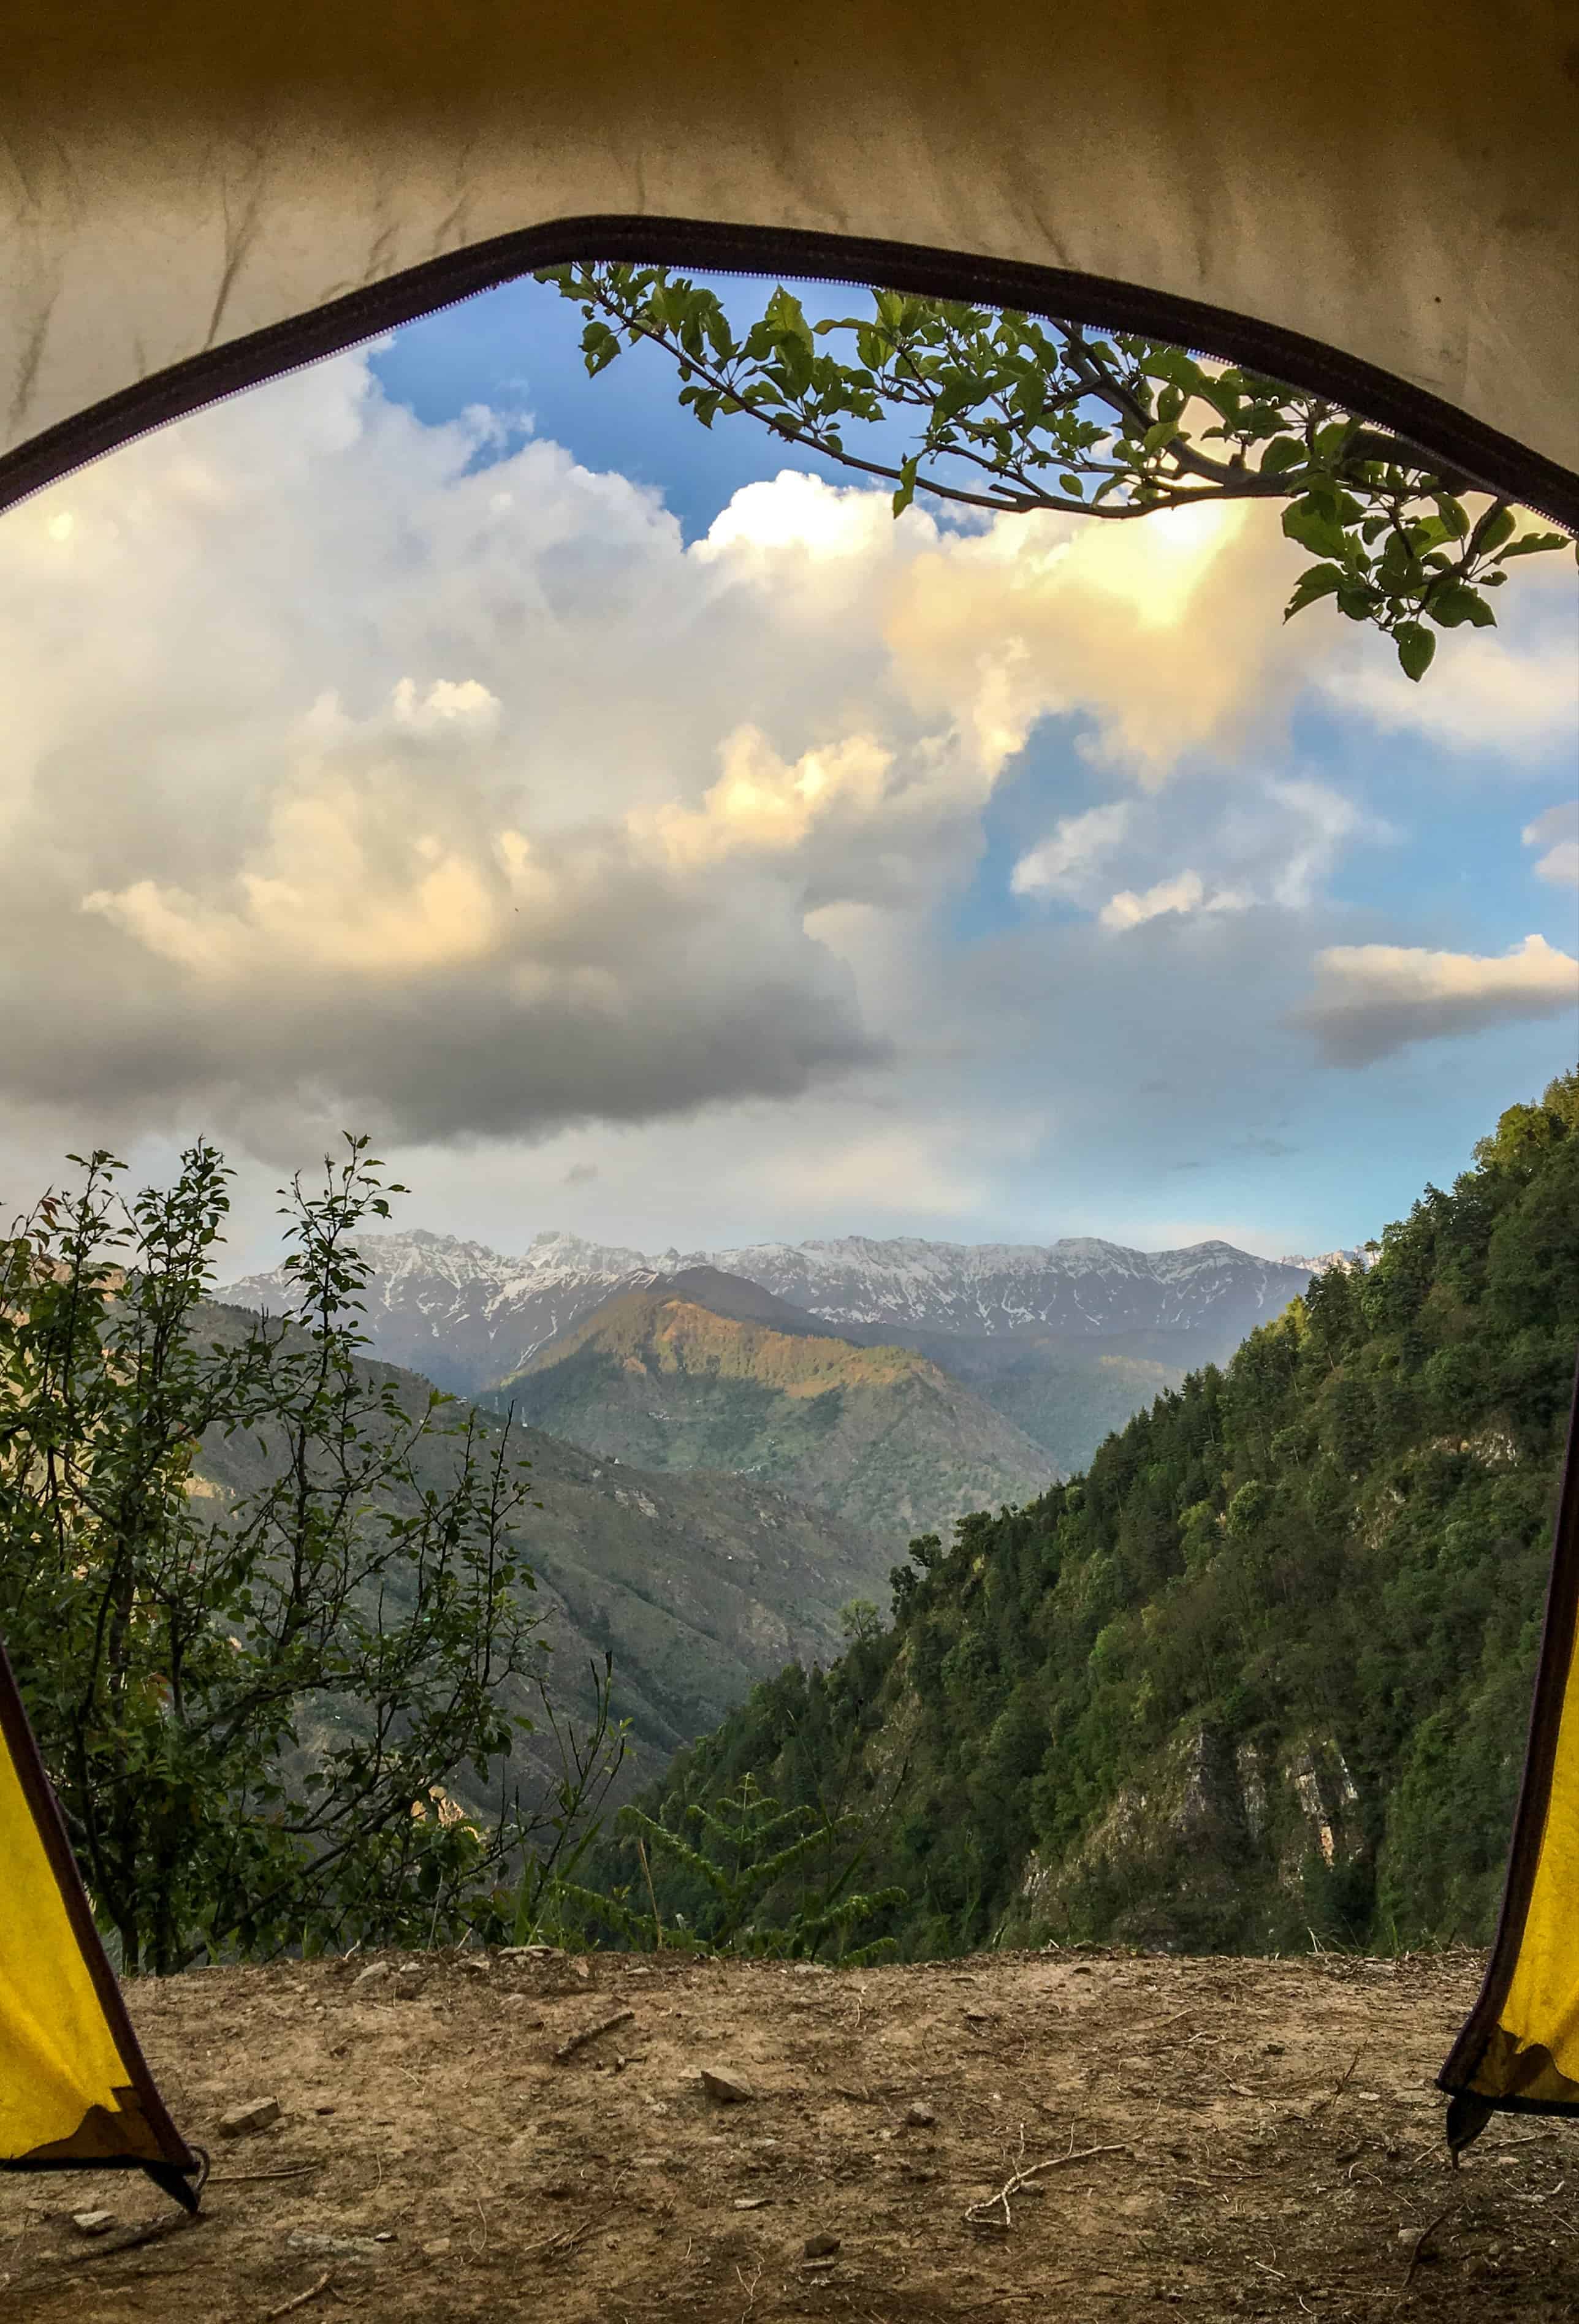 Morning view from the tent!